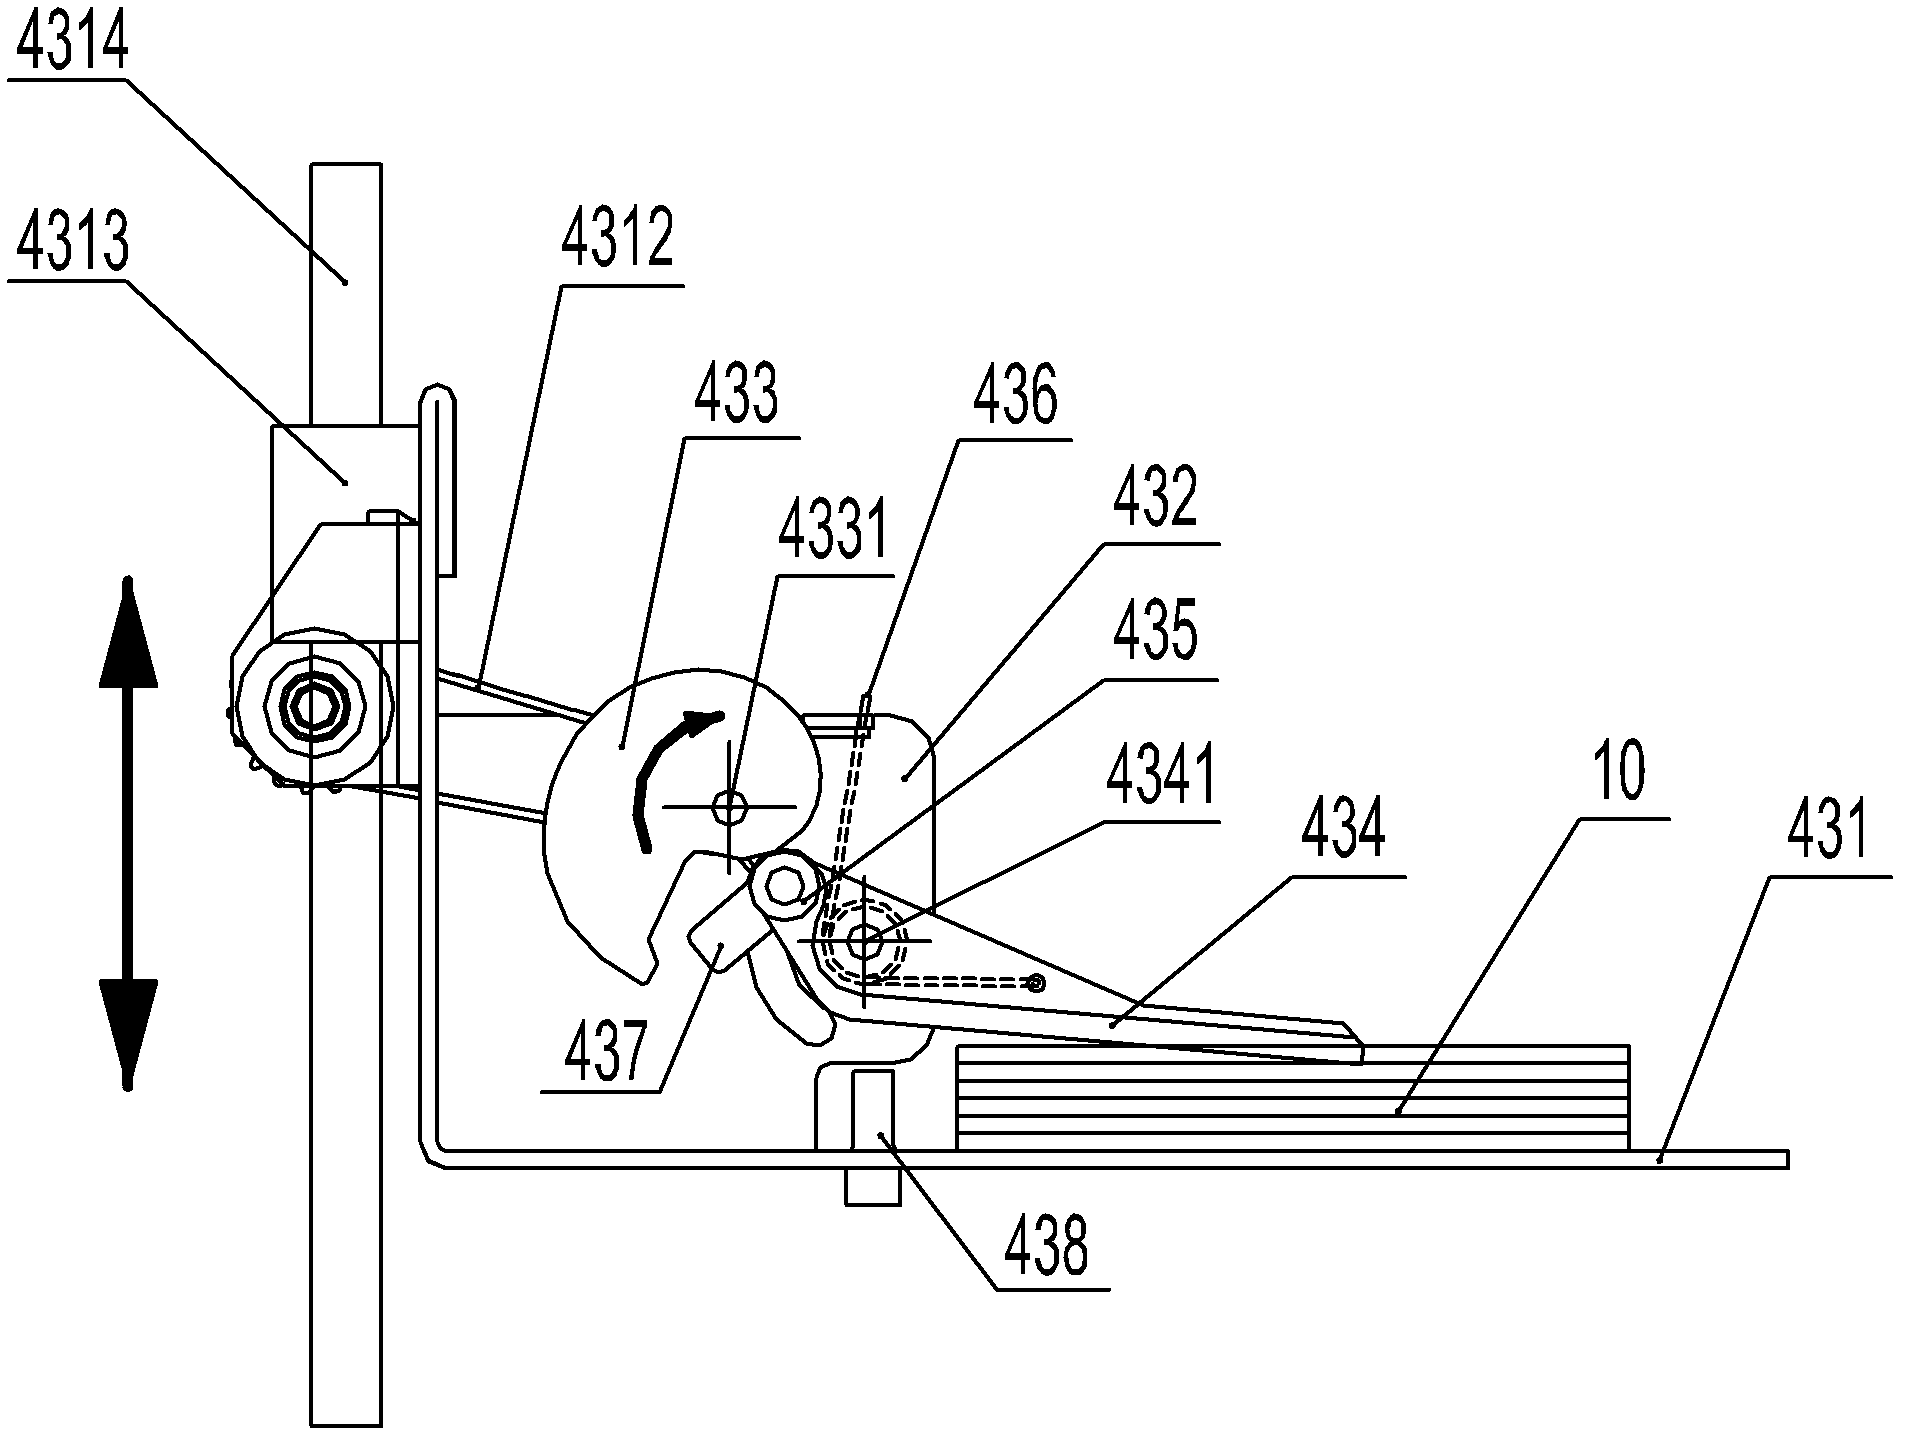 Clearing and binding all-in-one machine and bill stacking and sorting module thereof